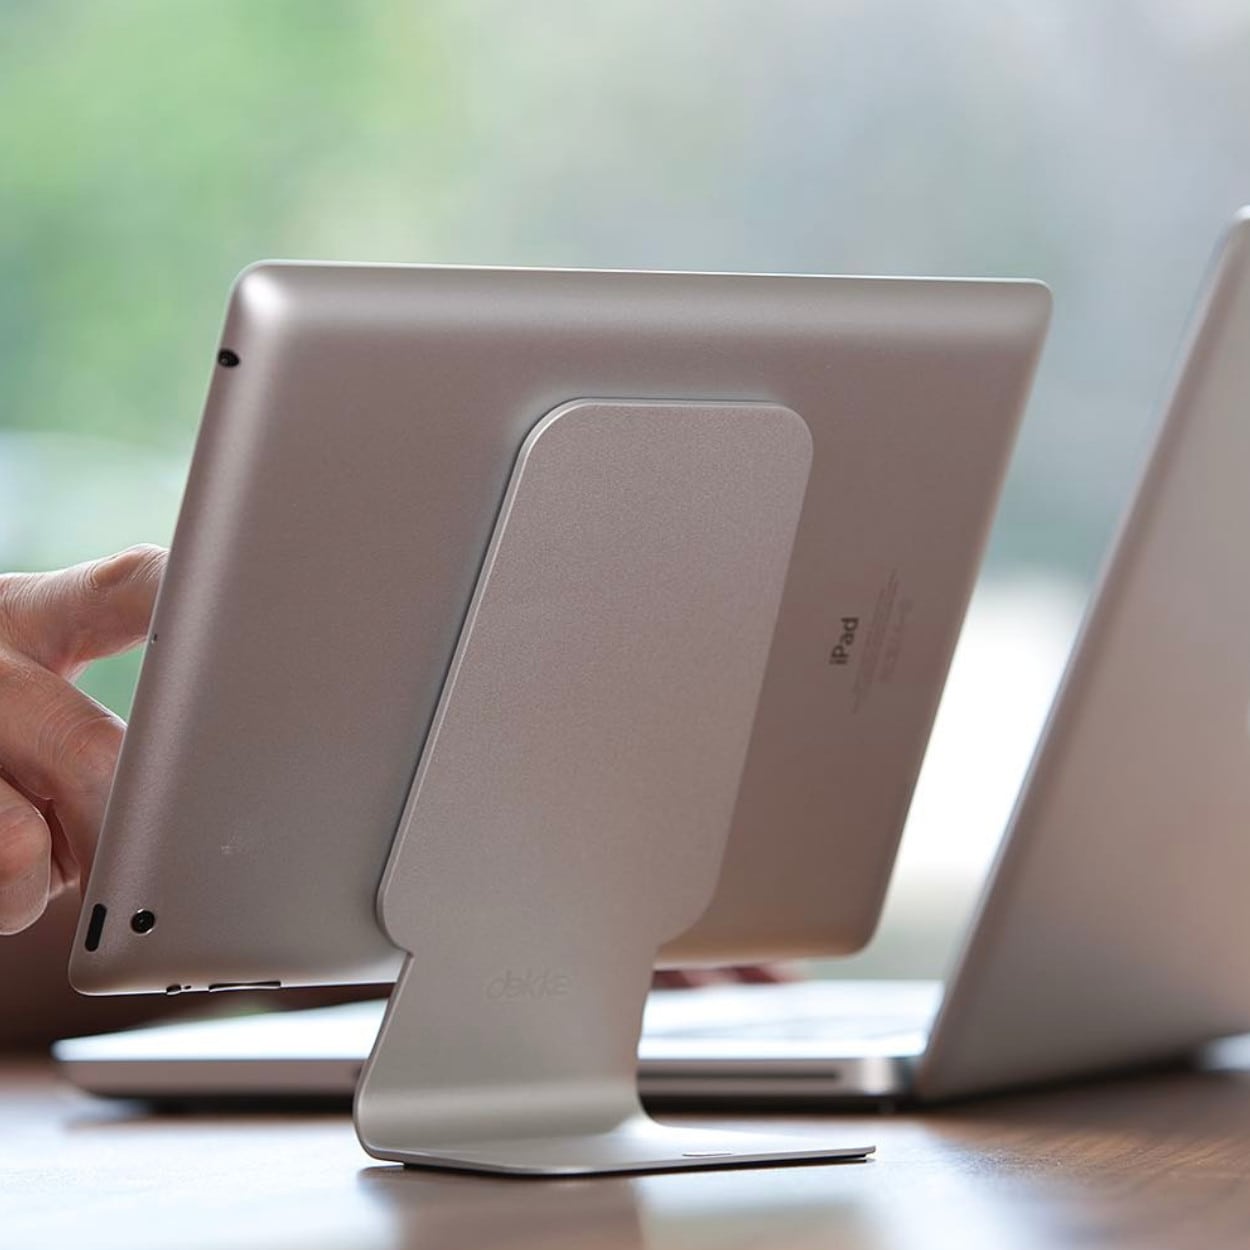 Slope has the same anodized finish as an iMac or MacBook, and a sticky micro-suction pad that holds your iPad firmly in place.